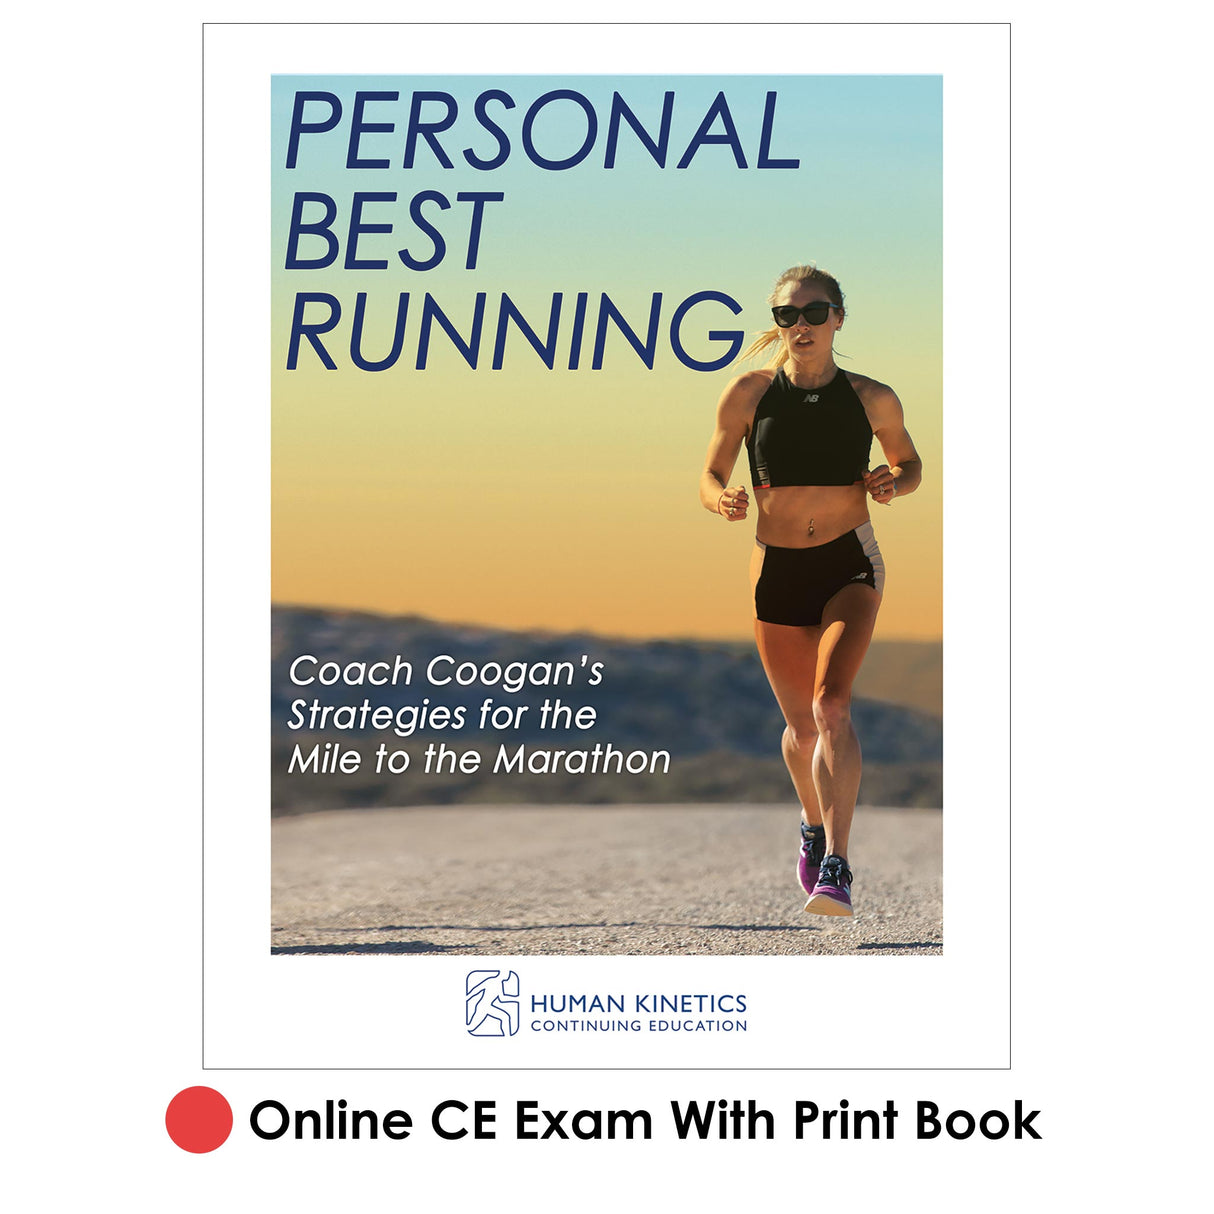 Personal Best Running Online CE Exam With Print Book